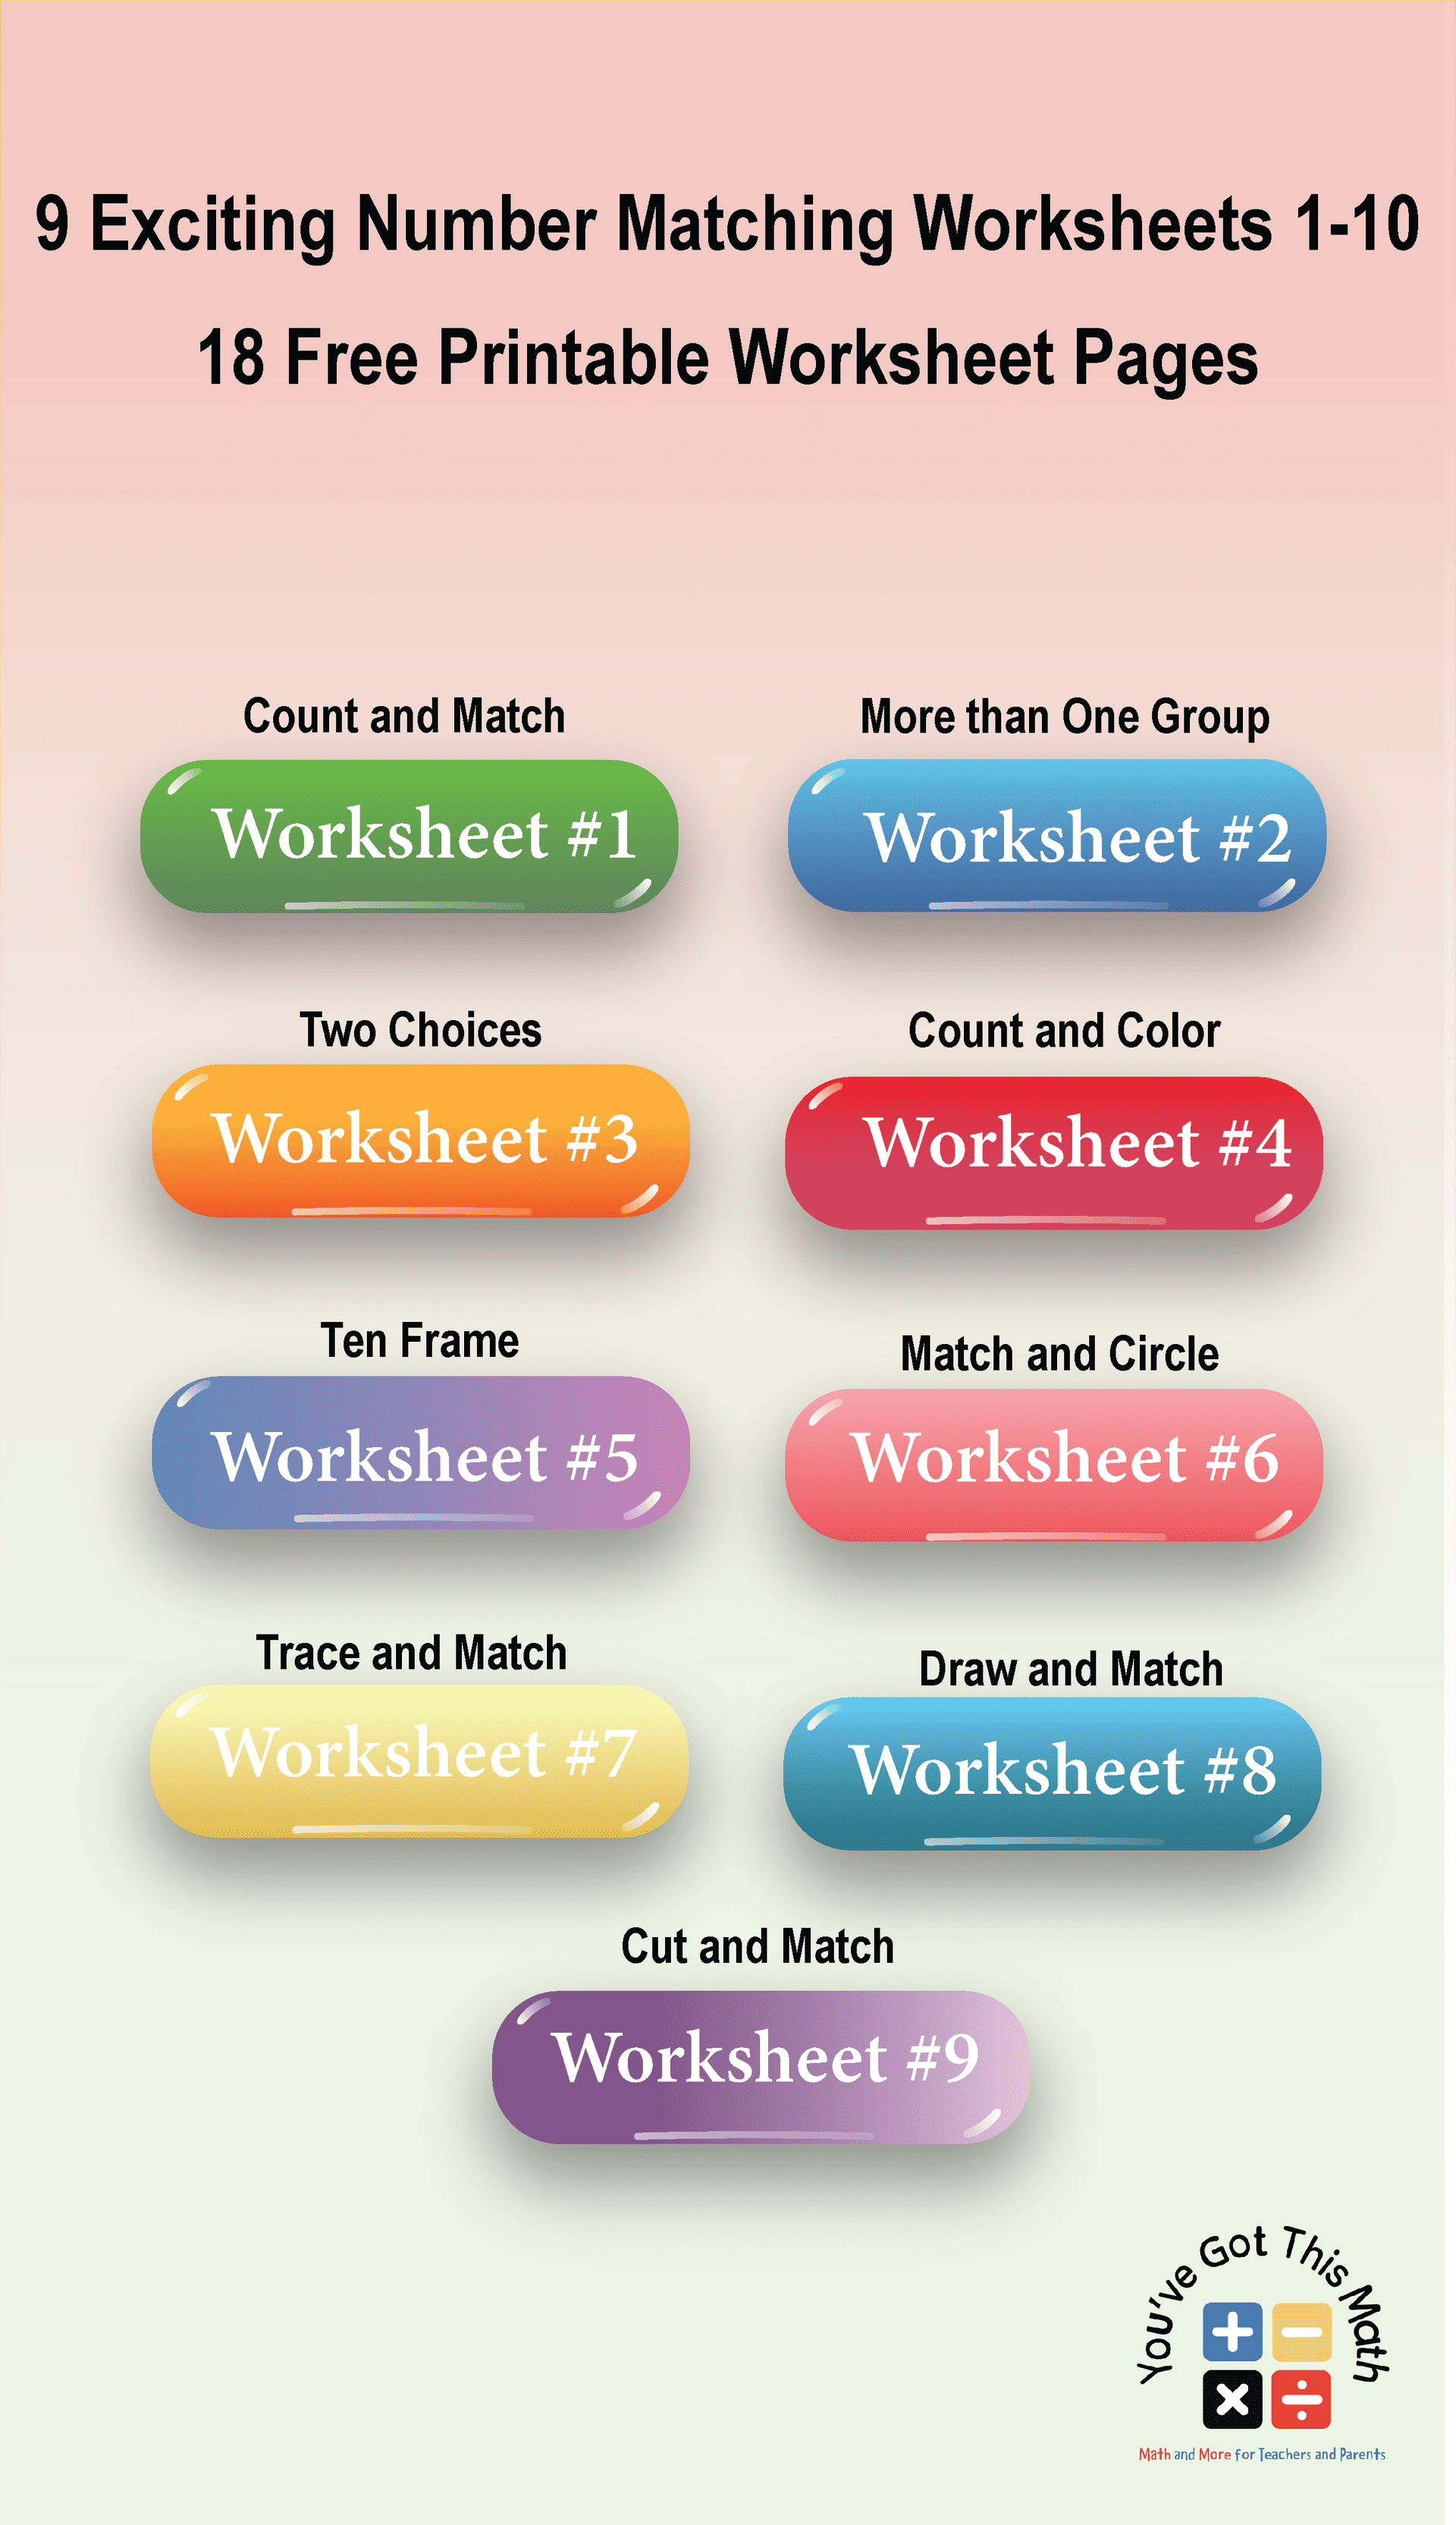 Number Matching Worksheets 1-10 feature box